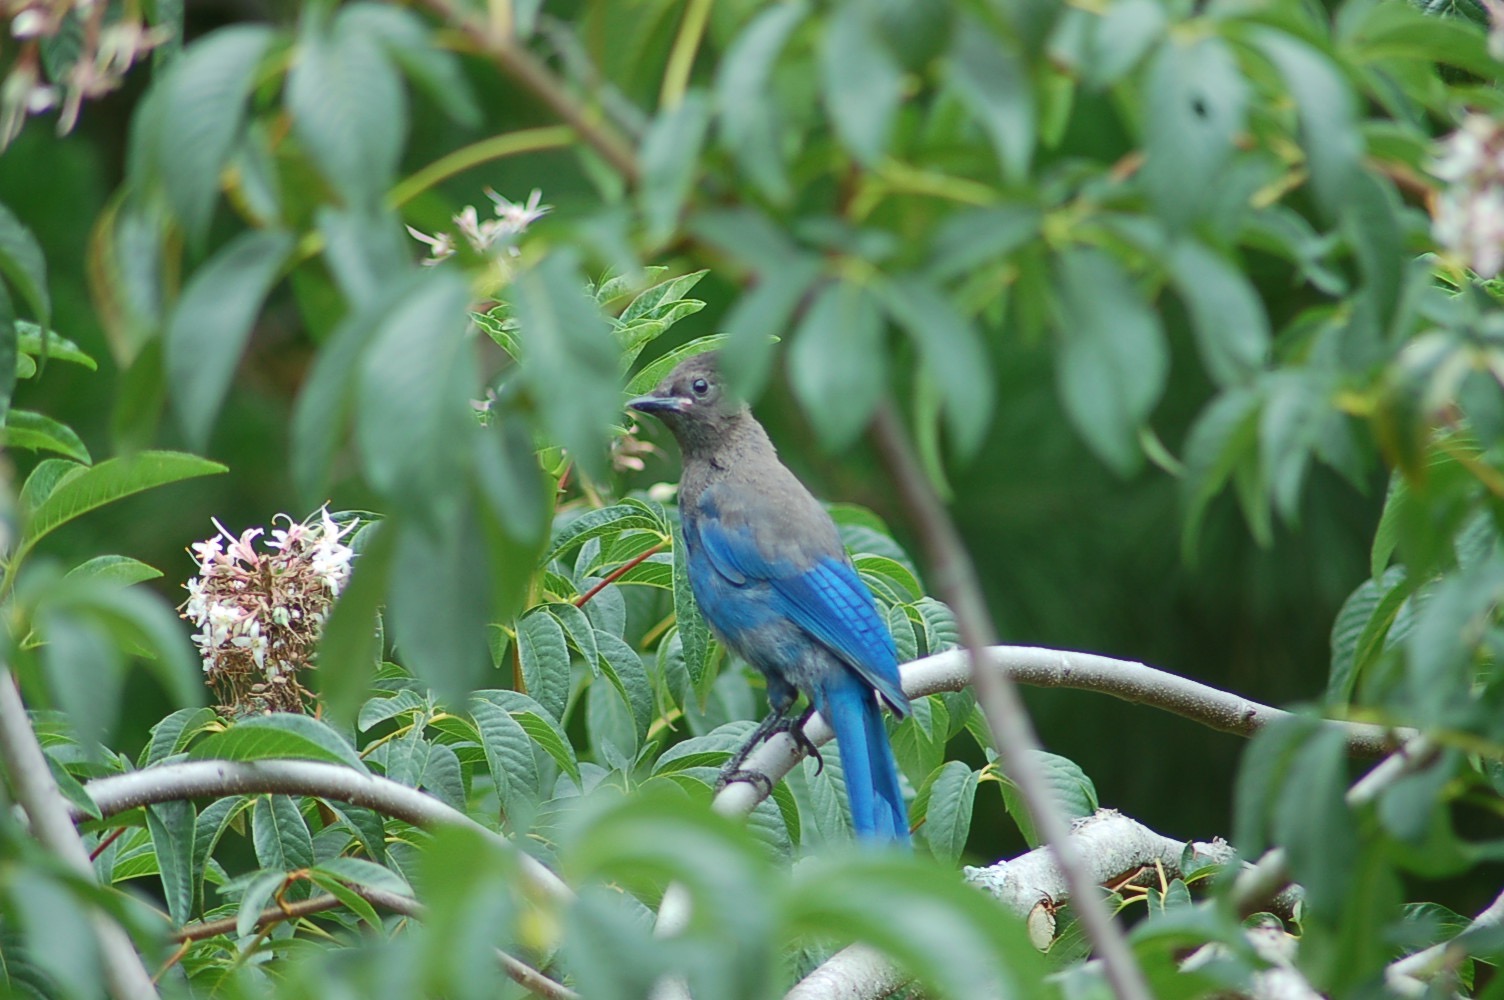 a blue bird perched in a tree with green leaves